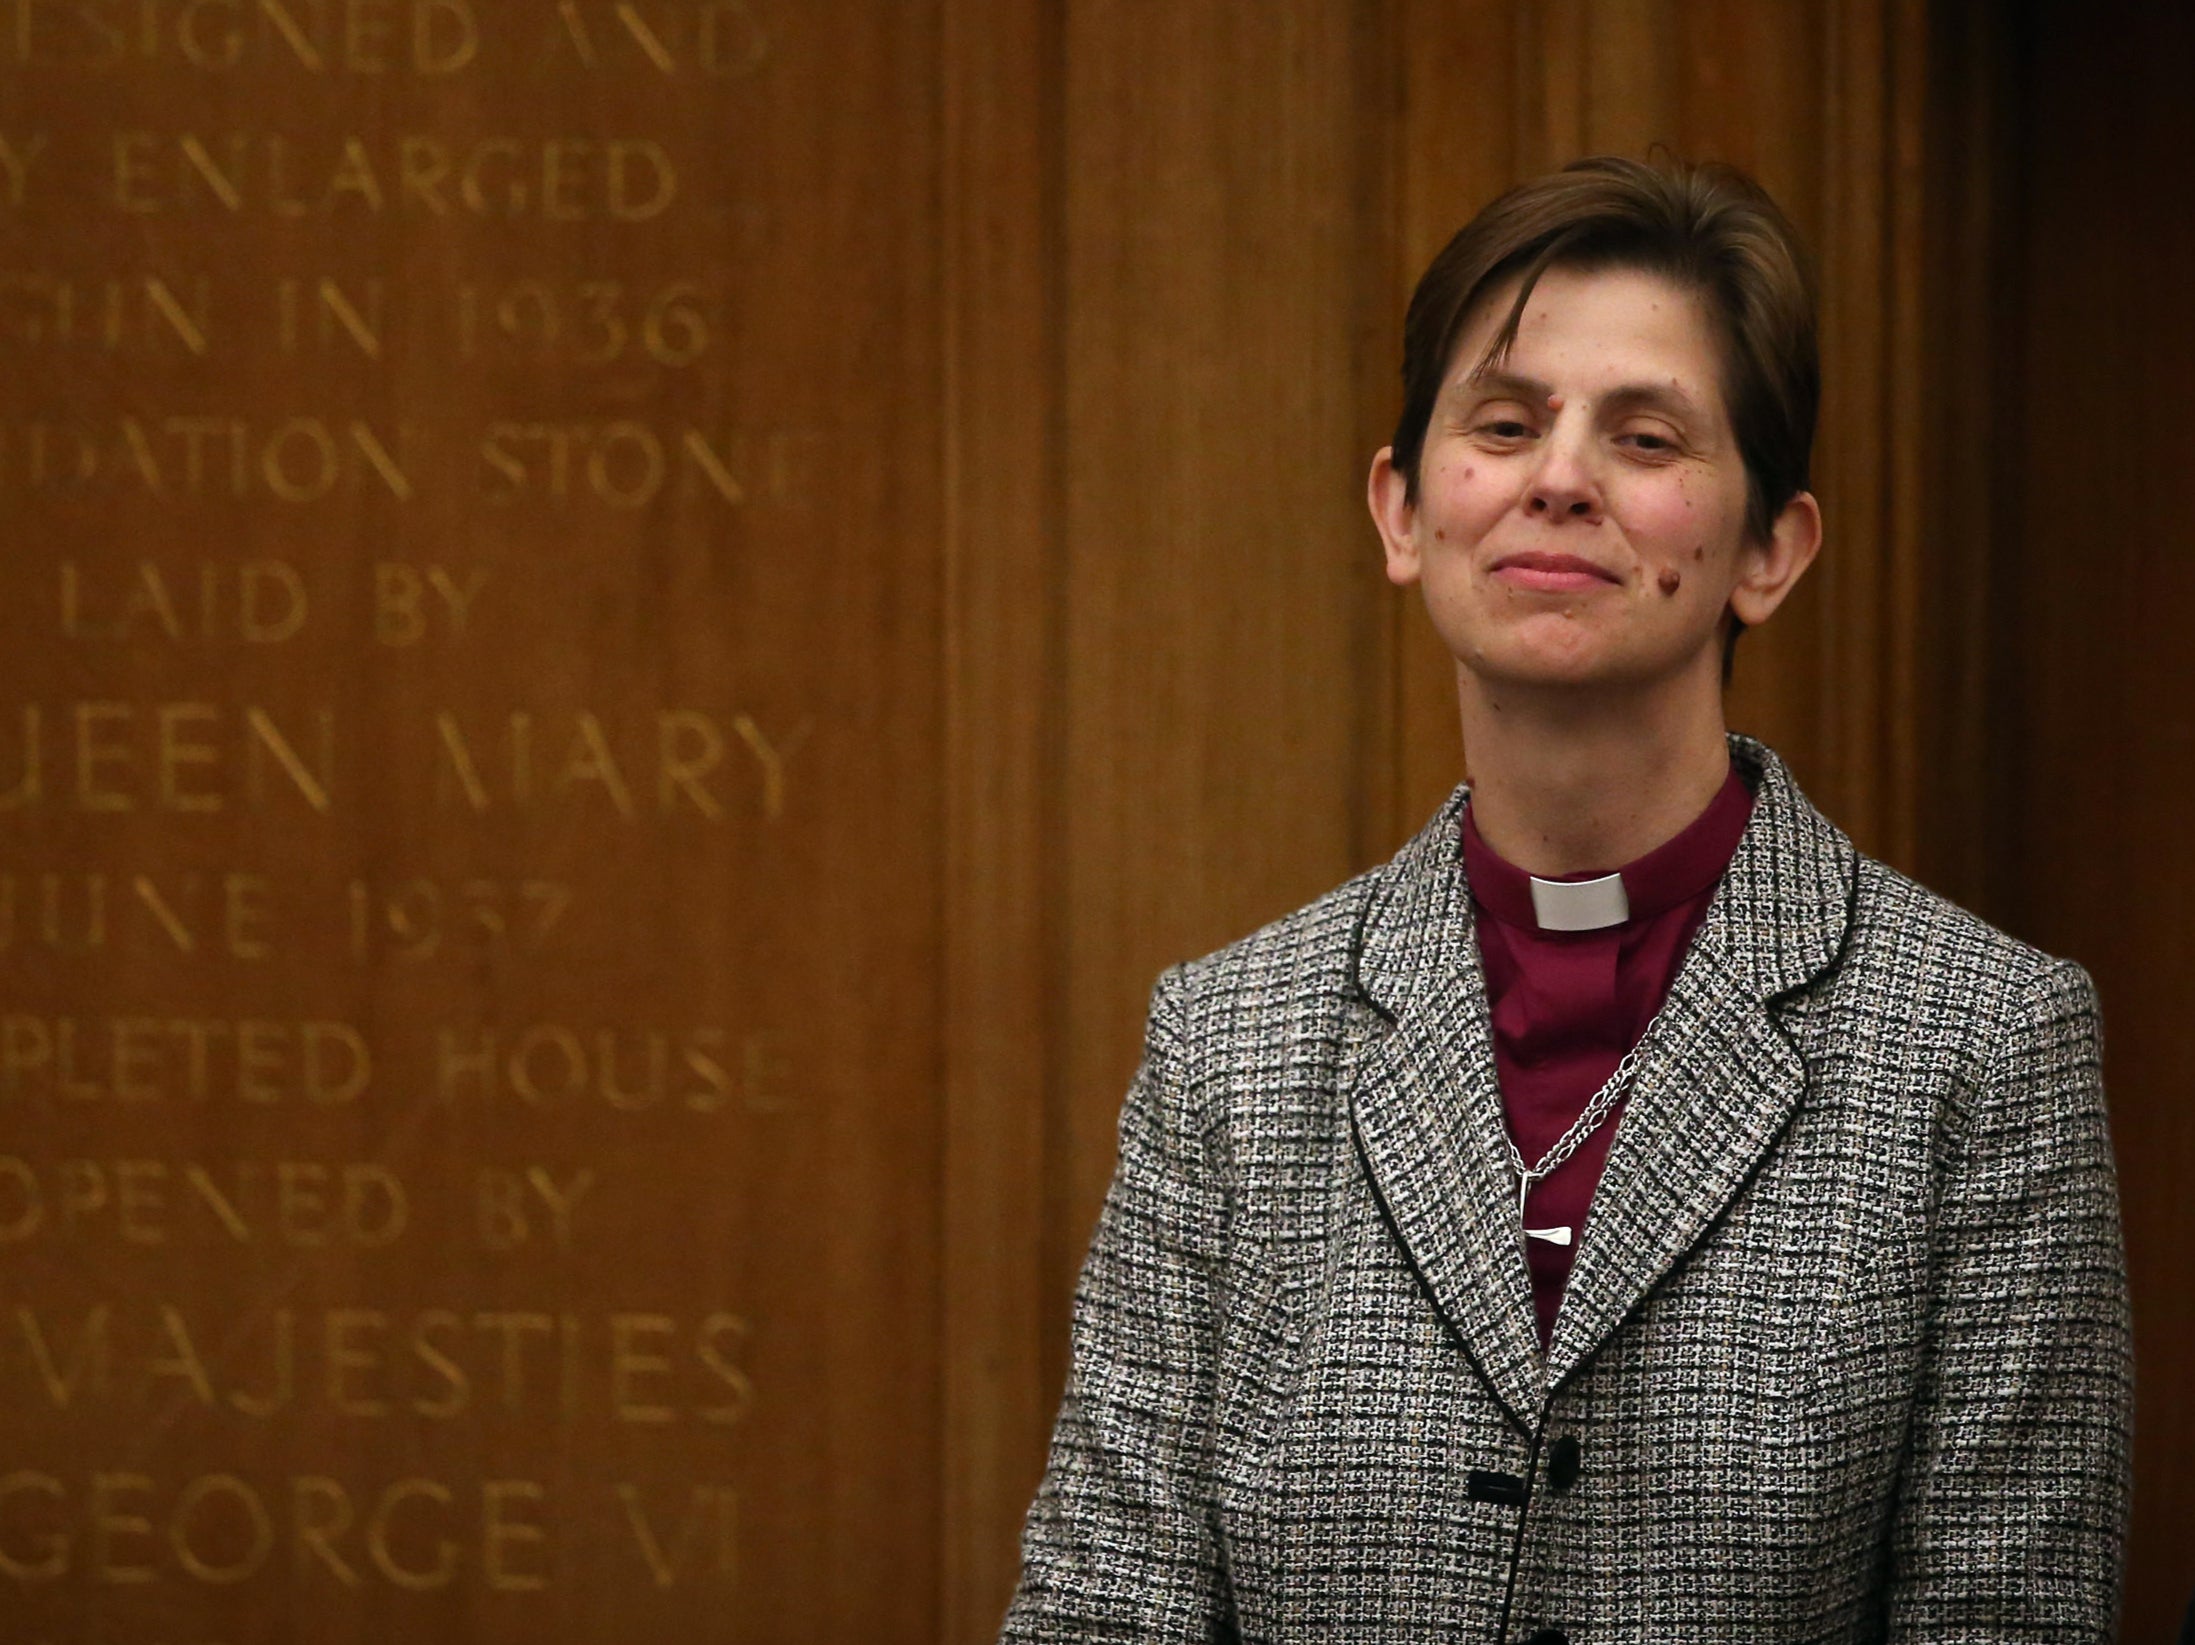 The Right Reverend Libby Lane has said people should choose a service that is right for them in order to watch the historic football match on Sunday